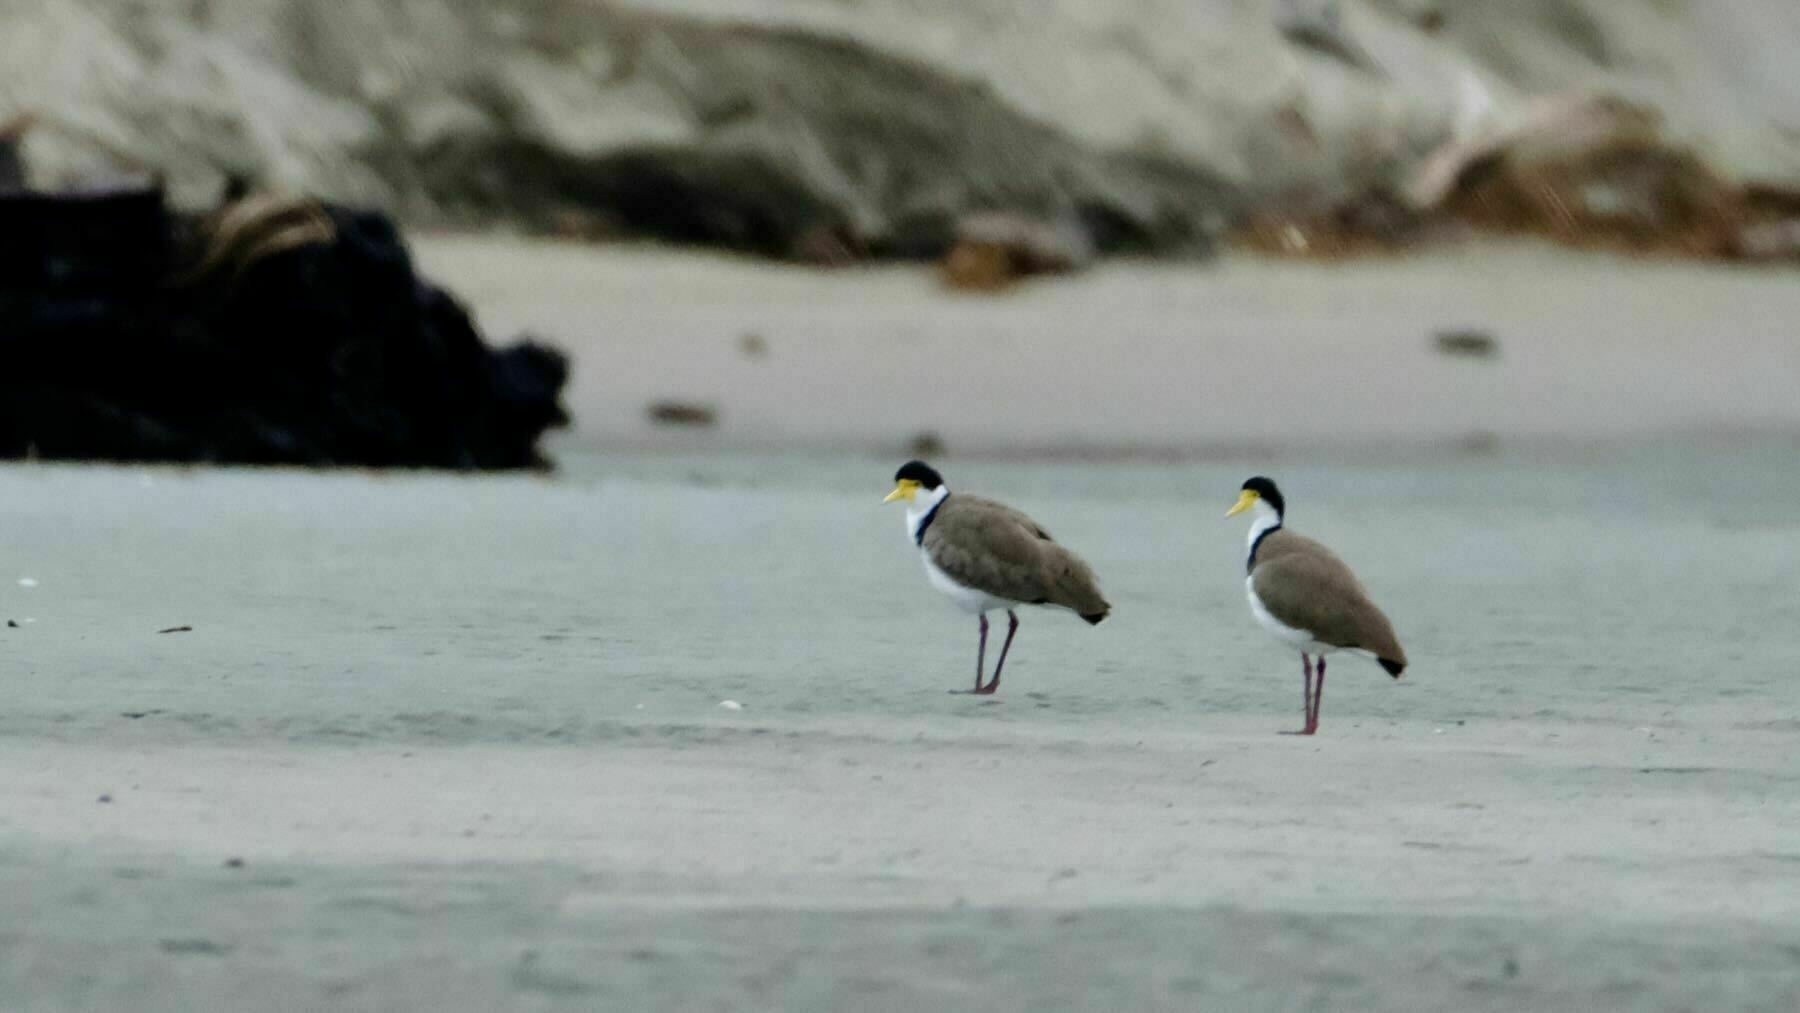 Two medium size birds on the beach. They have brown backs, white underparts, black caps and yellow bills.  